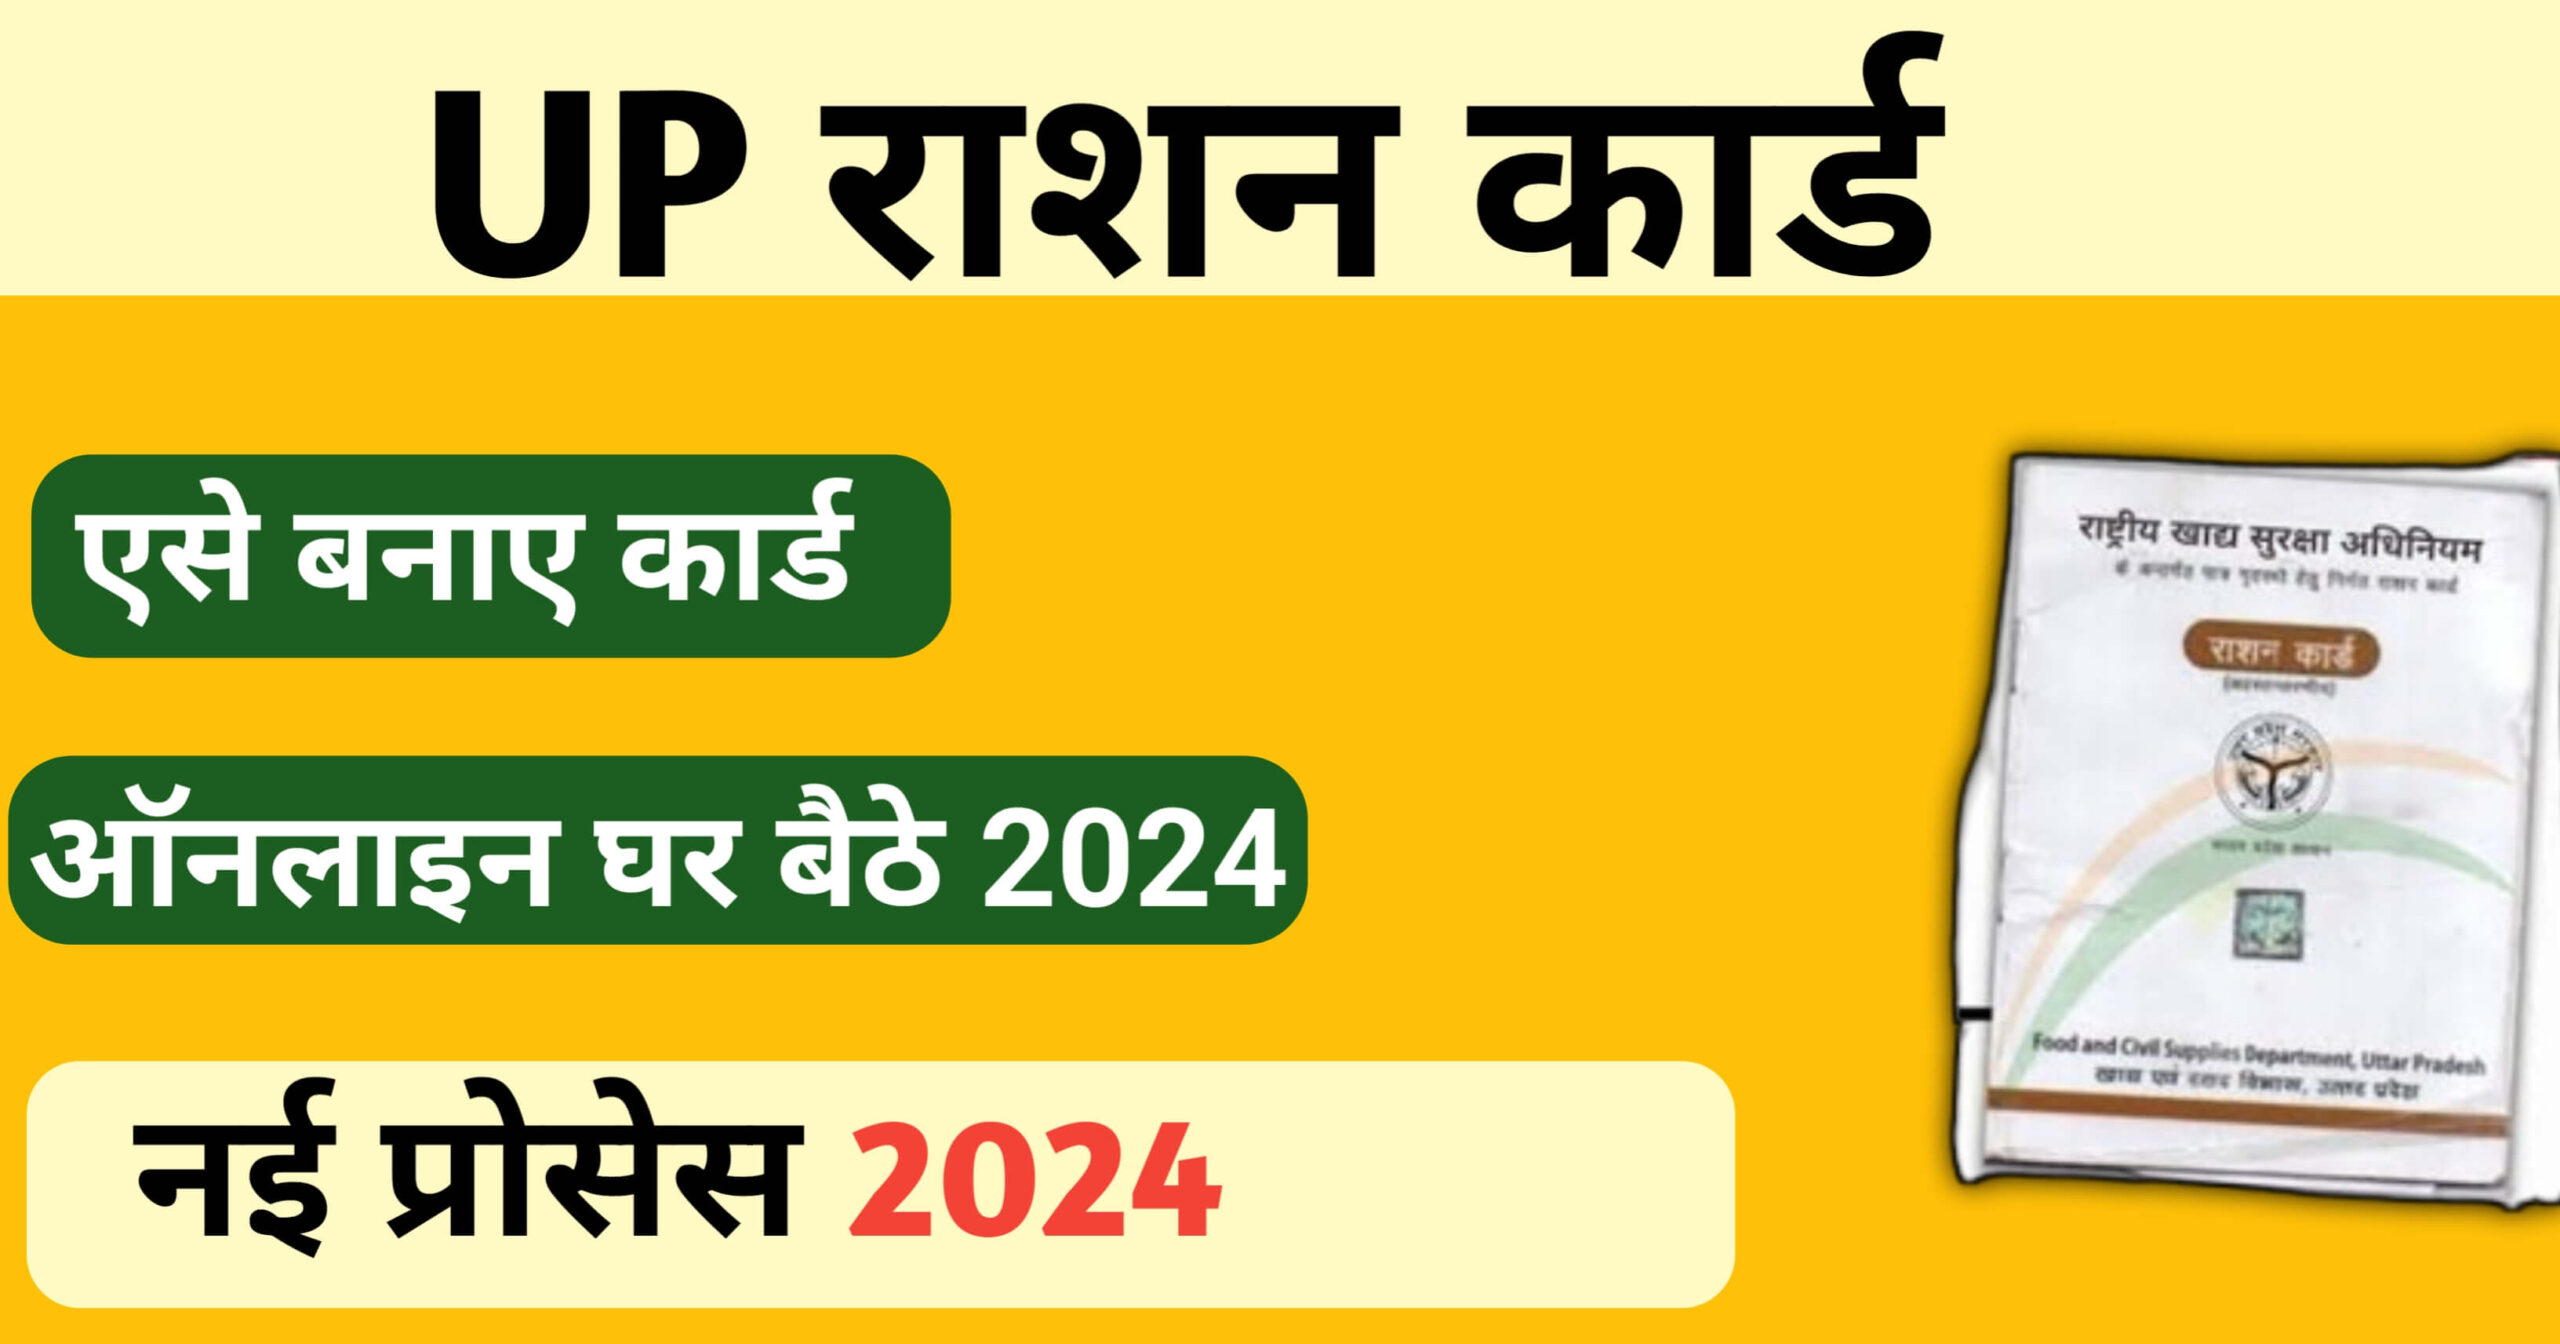 Up ration card 2024